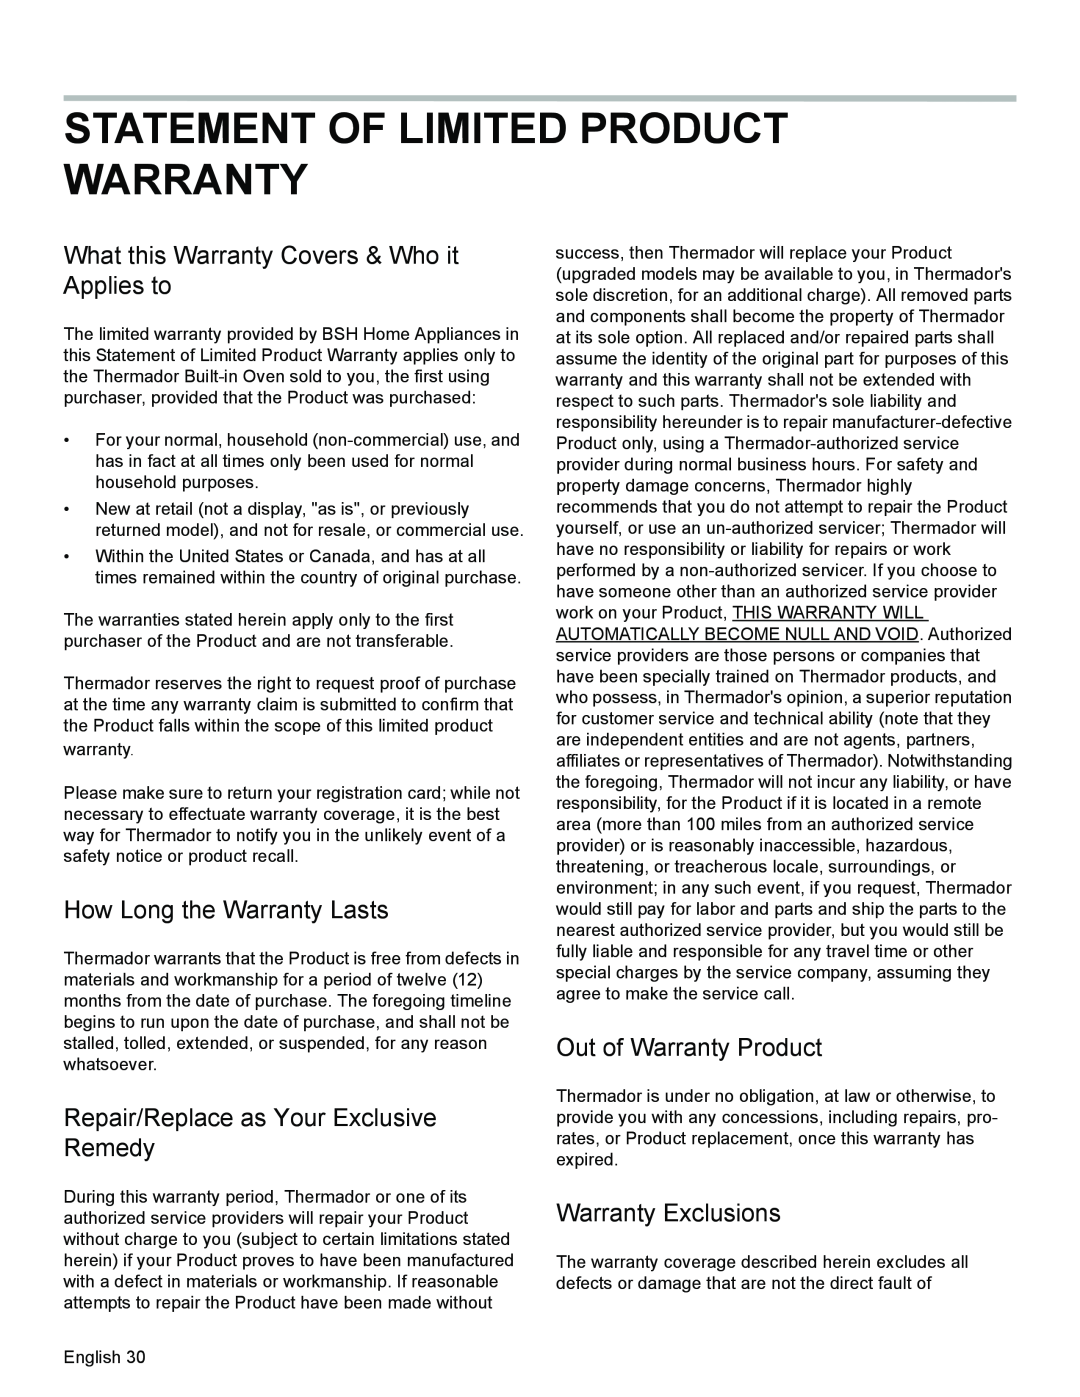 Thermador PODMW301, PODM301 manual Statement Of Limited Product Warranty, What this Warranty Covers & Who it Applies to 